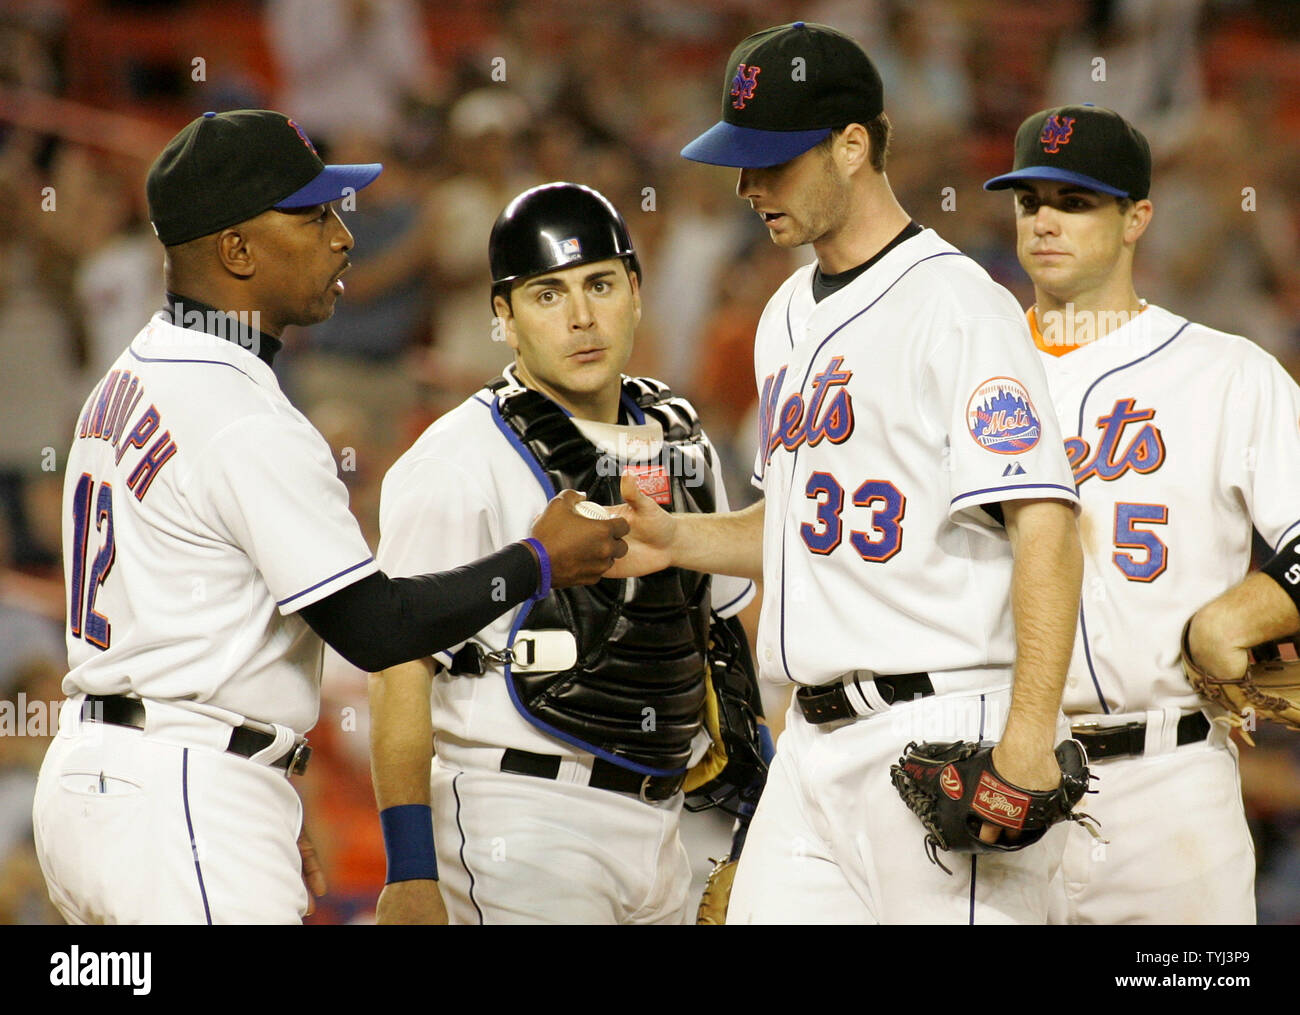 New York Mets' manager Willie Randolph (L) takes the ball from starting pitcher John Maine (33) as catcher Paul Lo Duca and third baseman David Wright (R) look on in the seventh inning of their game against the Minnesota Twins during the first game of their inter-league series at Shea Stadium on June 18, 2007 in New York. (UPI Photo/Monika Graff) Stock Photo